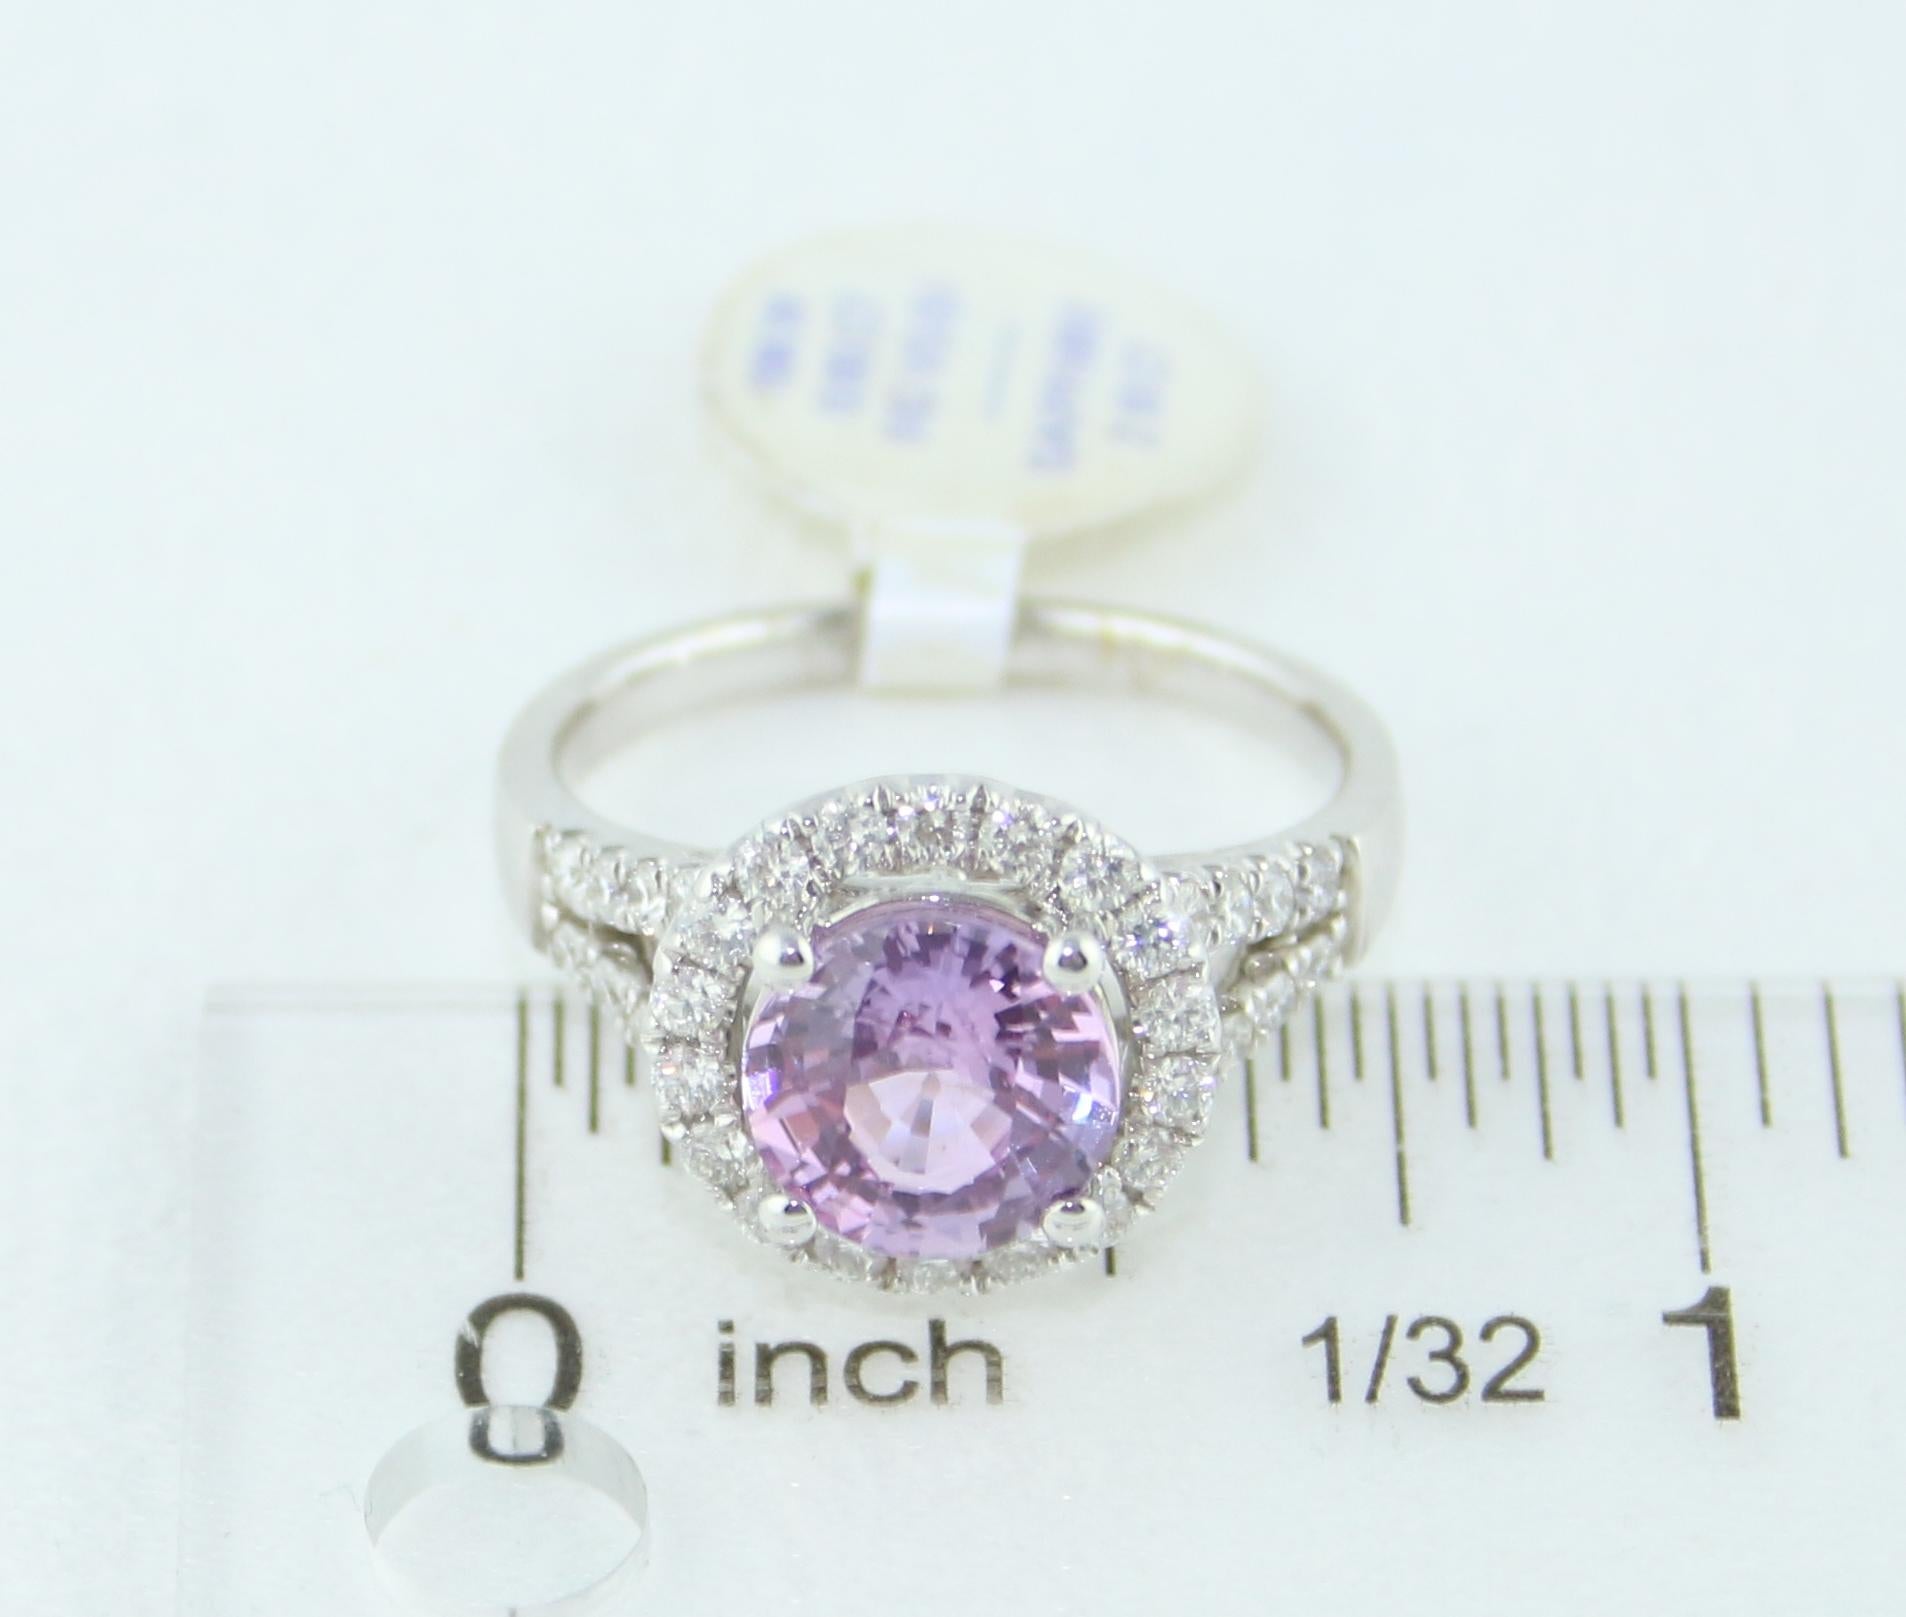 Certified No Heat 2.18 Carat Round Pink Sapphire Diamond Gold Ring For Sale 3